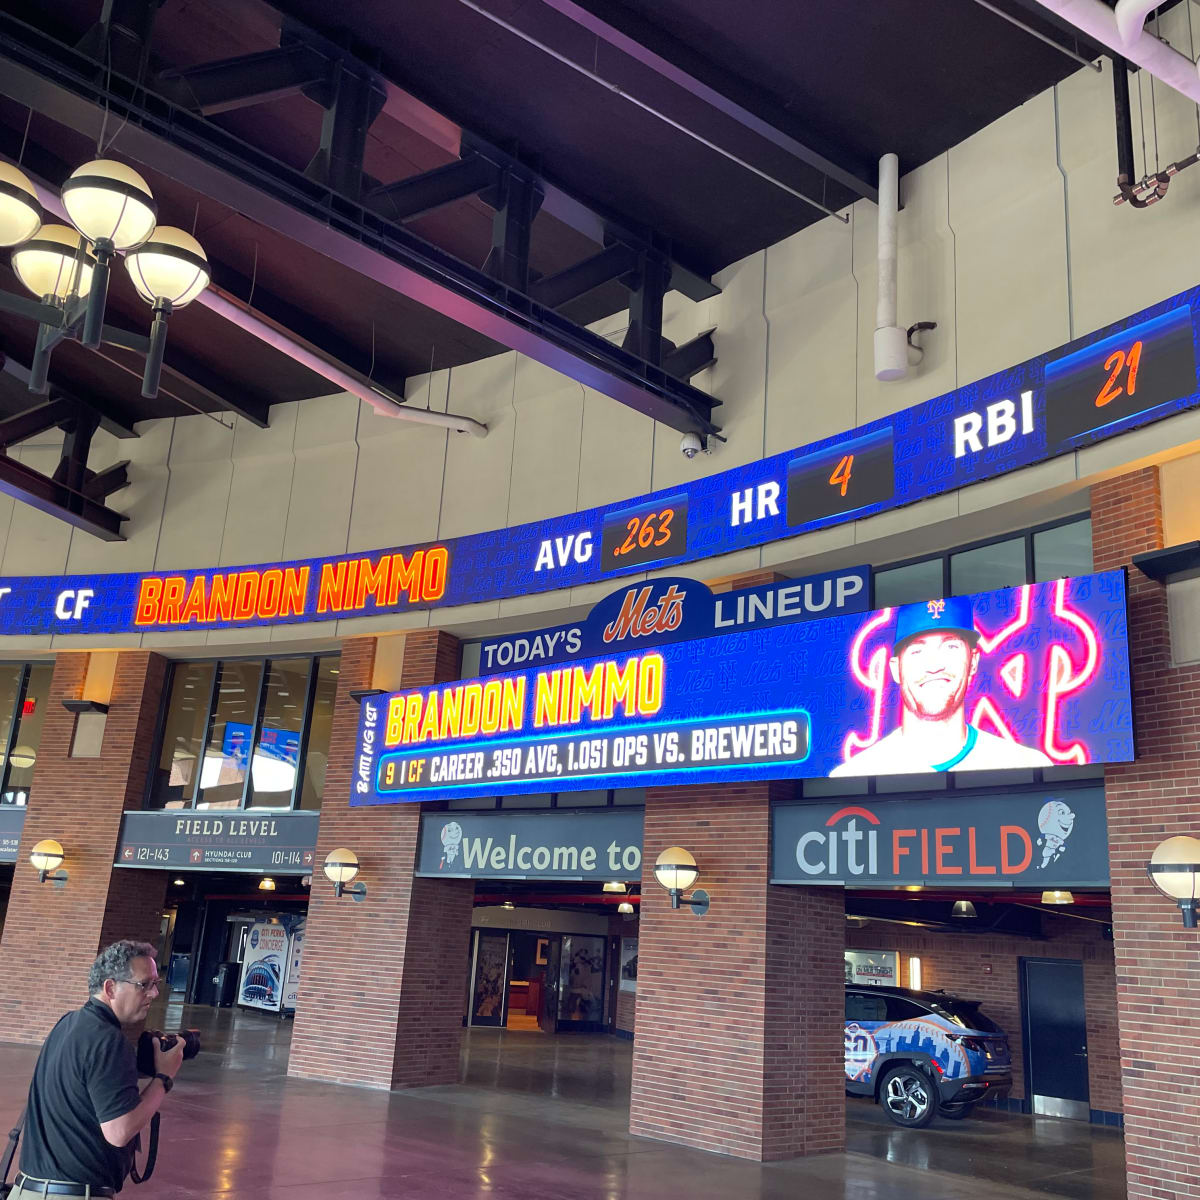 New York Mets fans claim 'this franchise is cursed' after spotting bizarre  message on Citi Field jumbotron